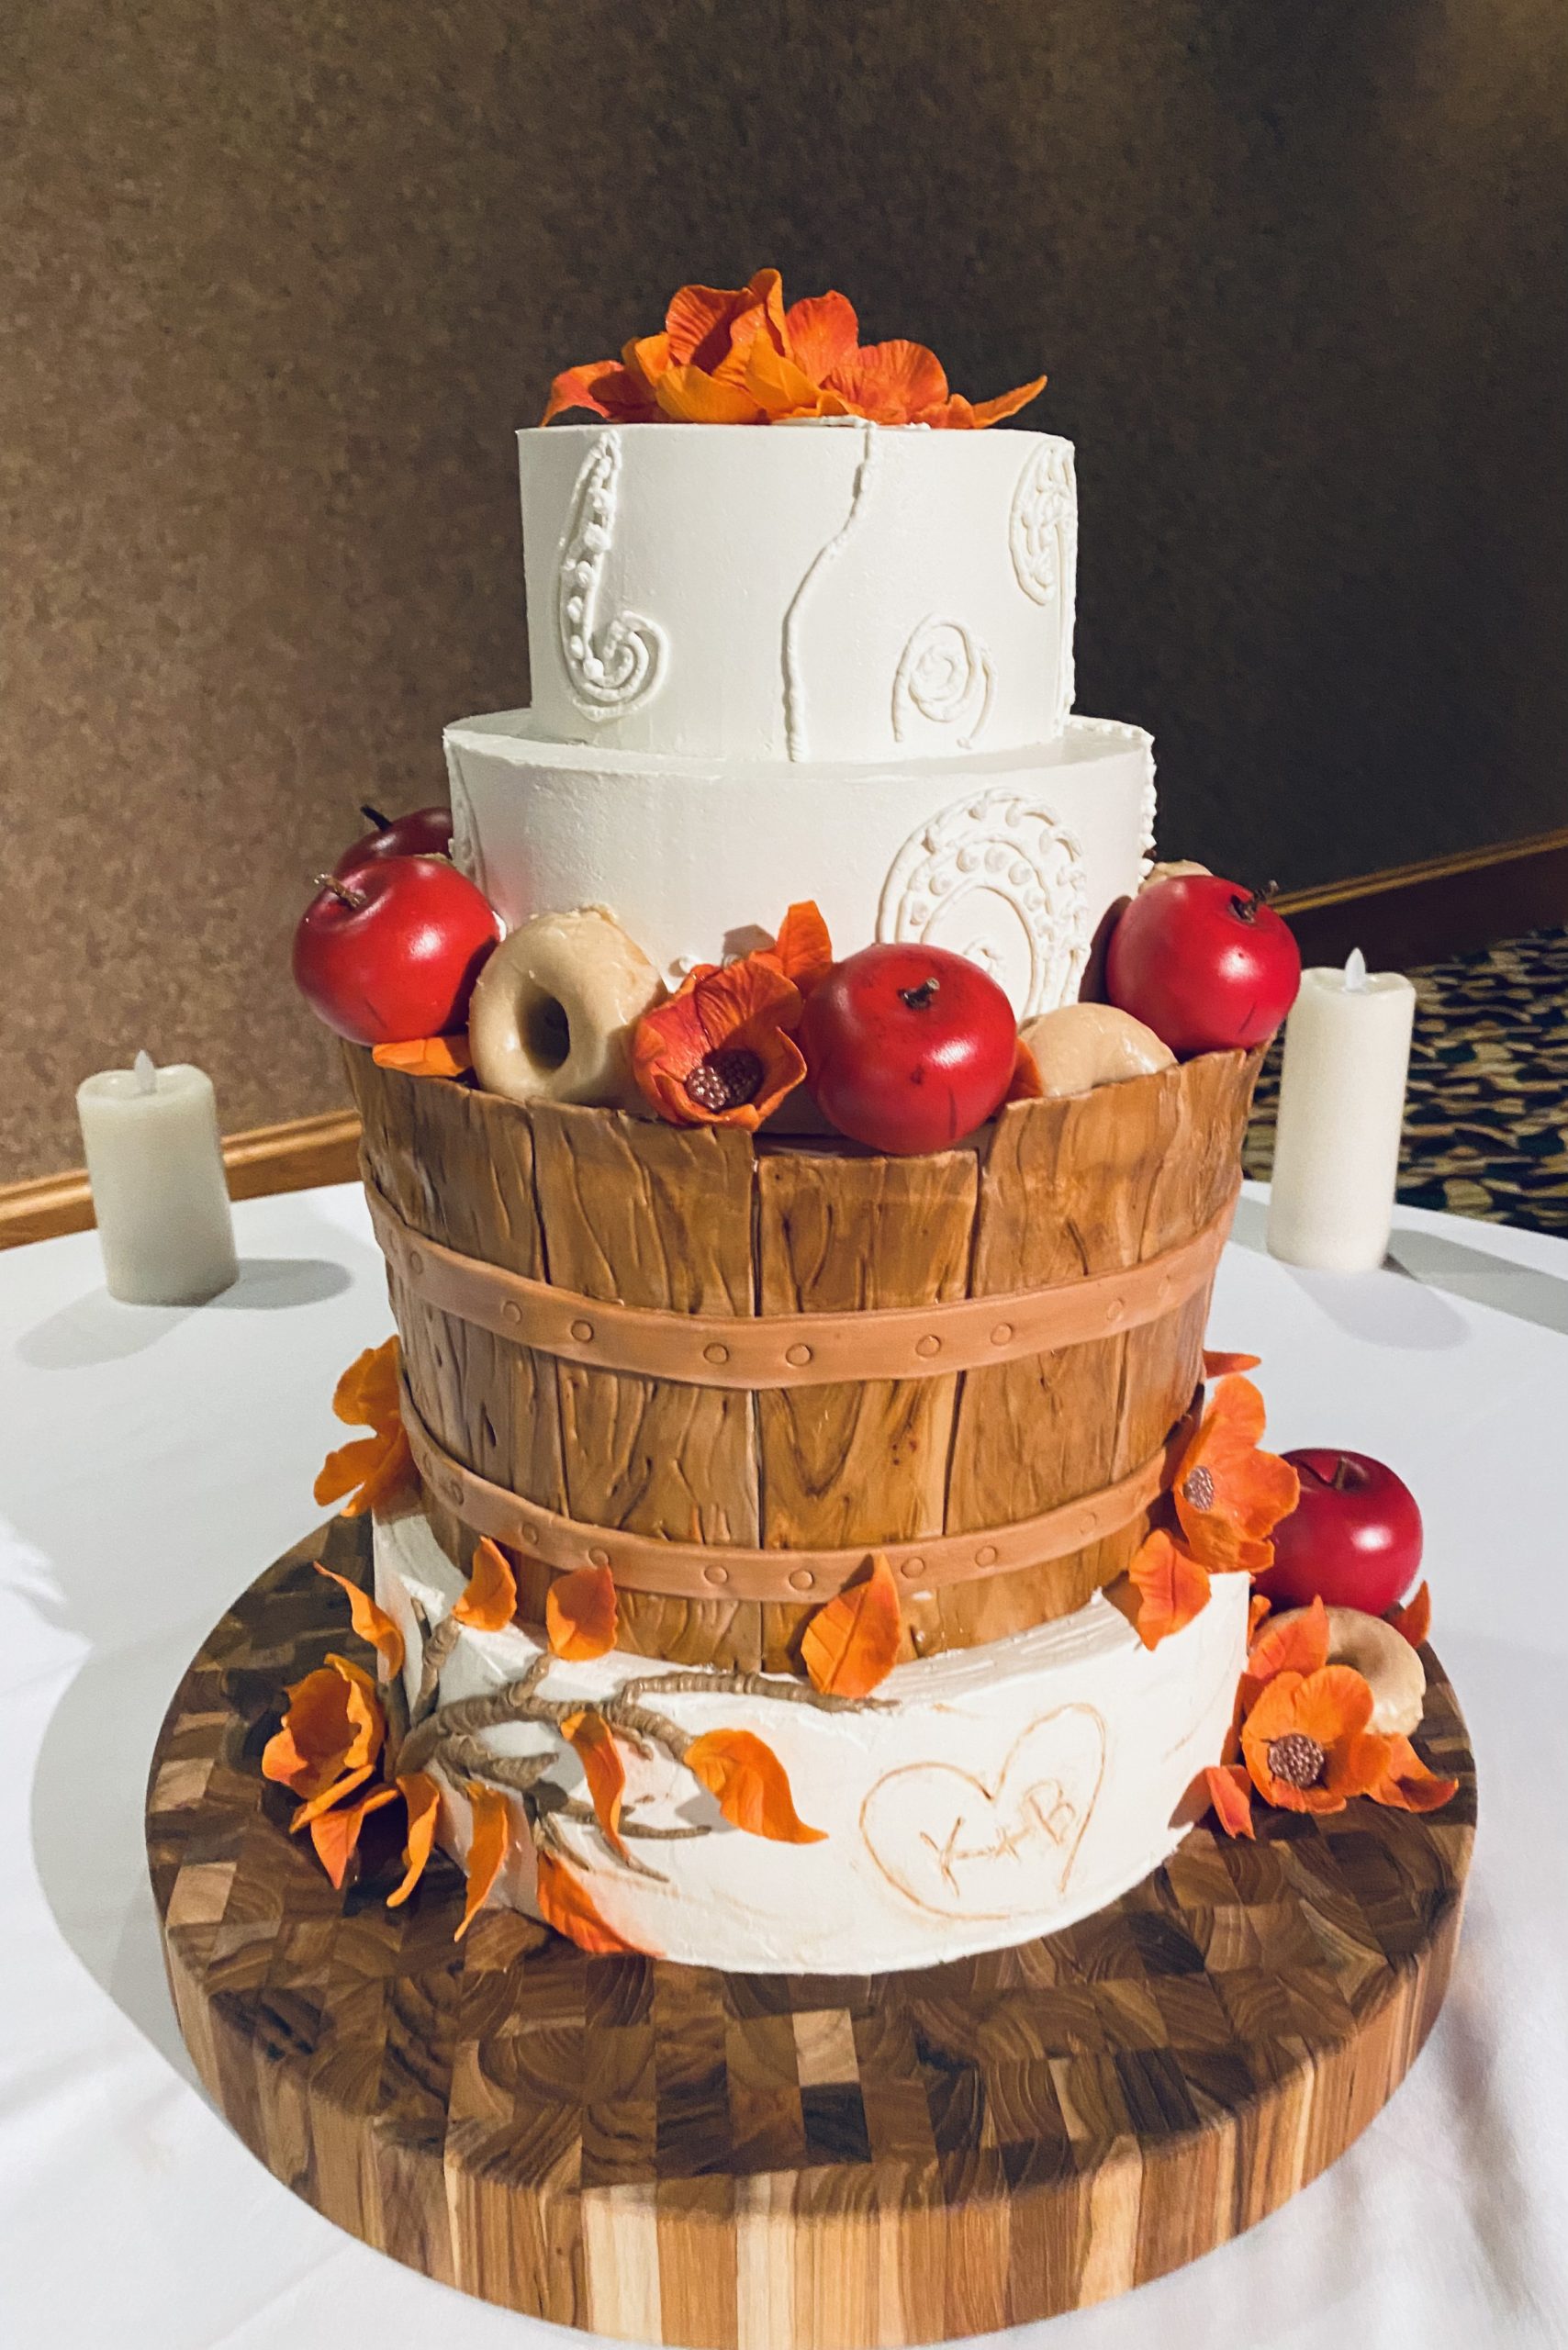 A beautiful 4-tier custom wedding cake with hand-piped buttercream detail, wood-look fondant, and fondant flowers from Village Patisserie in Toledo, Ohio